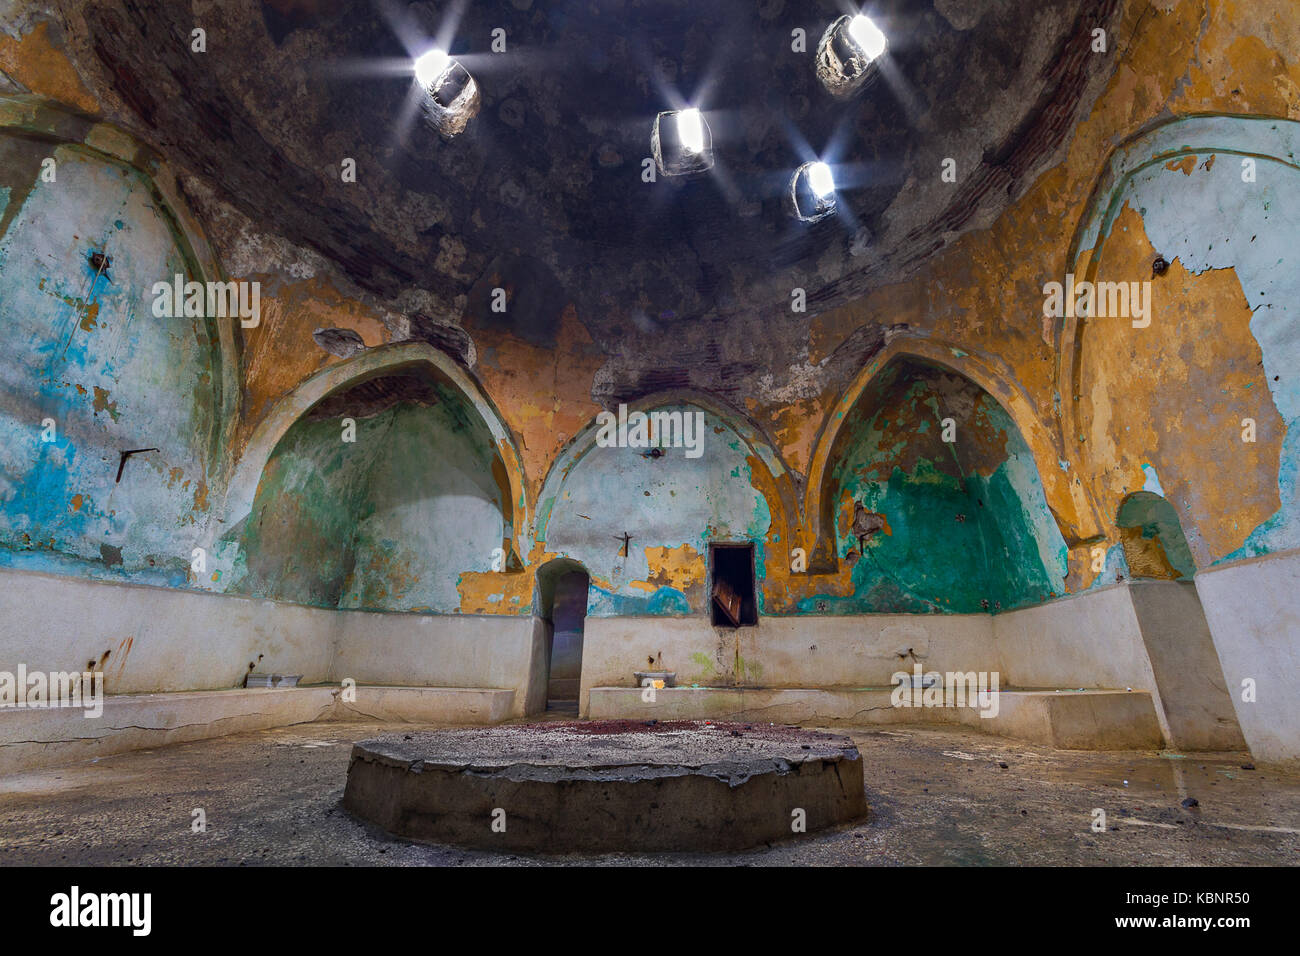 Abandoned historical Turkish Bath built by the Ottomans, in Kars, Turkey. Stock Photo